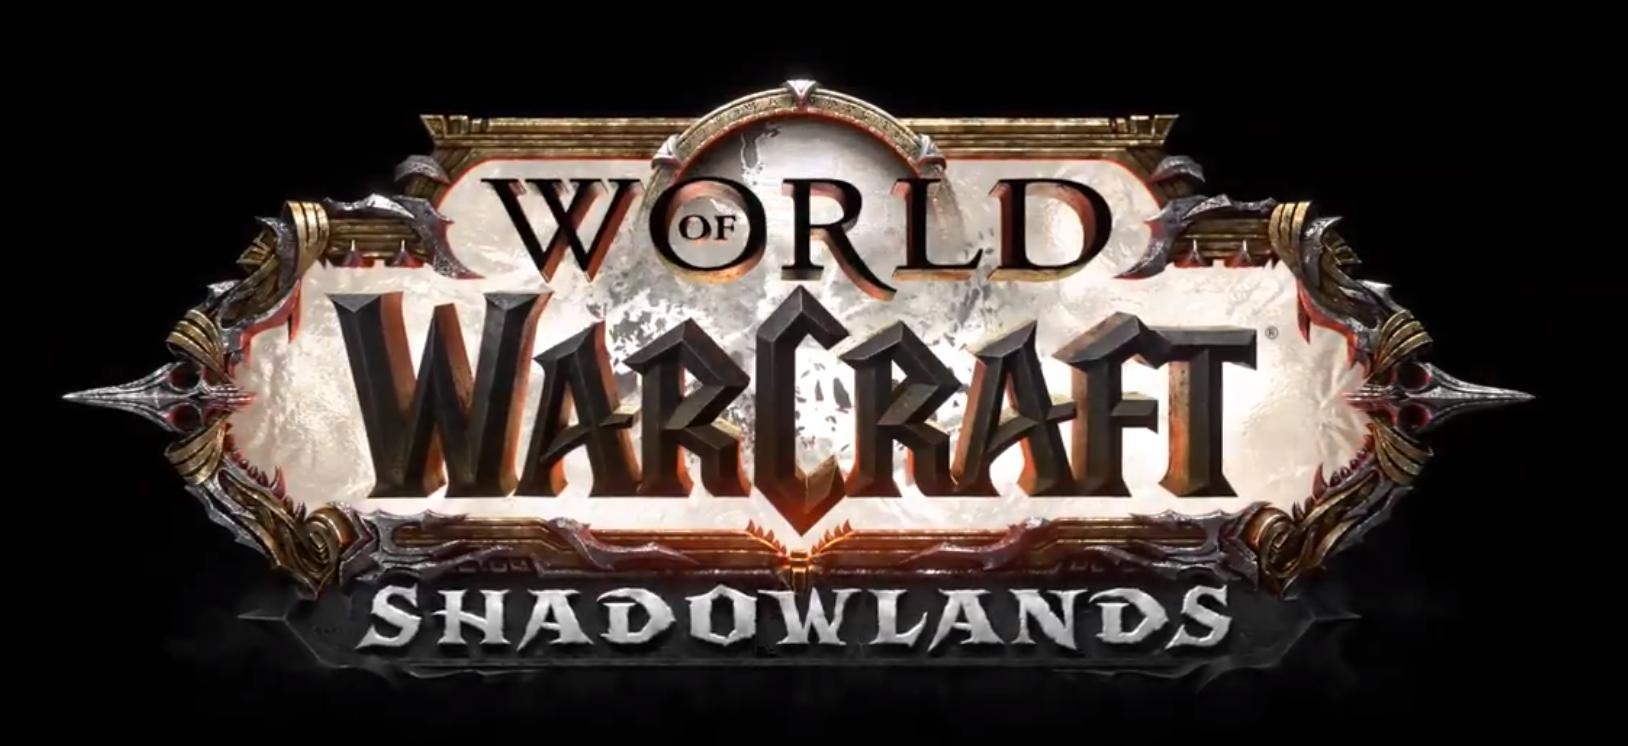 'World of Warcraft: Shadowlands' announced at Blizzcon 2019